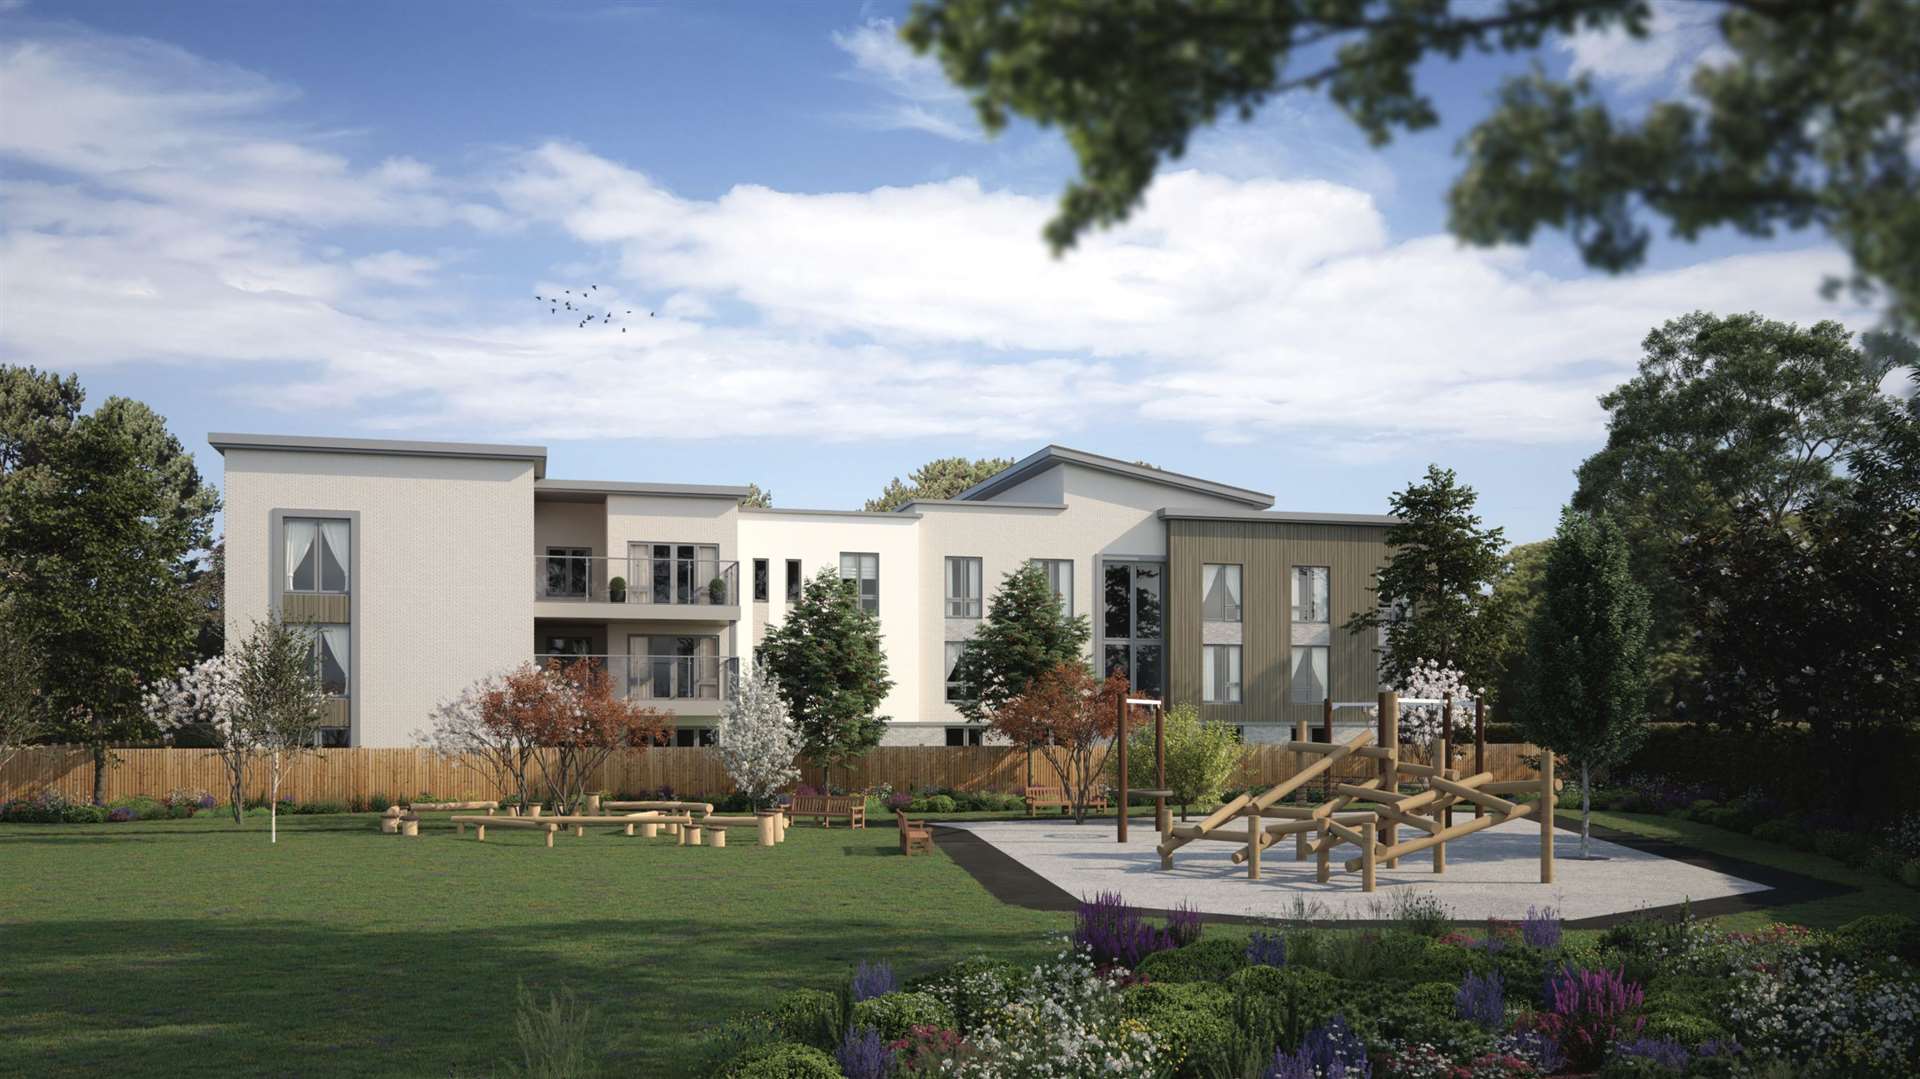 Aspire LLP is looking to build a new care facility near Tesco Extra in Whitstable. Pic: DHA Planning